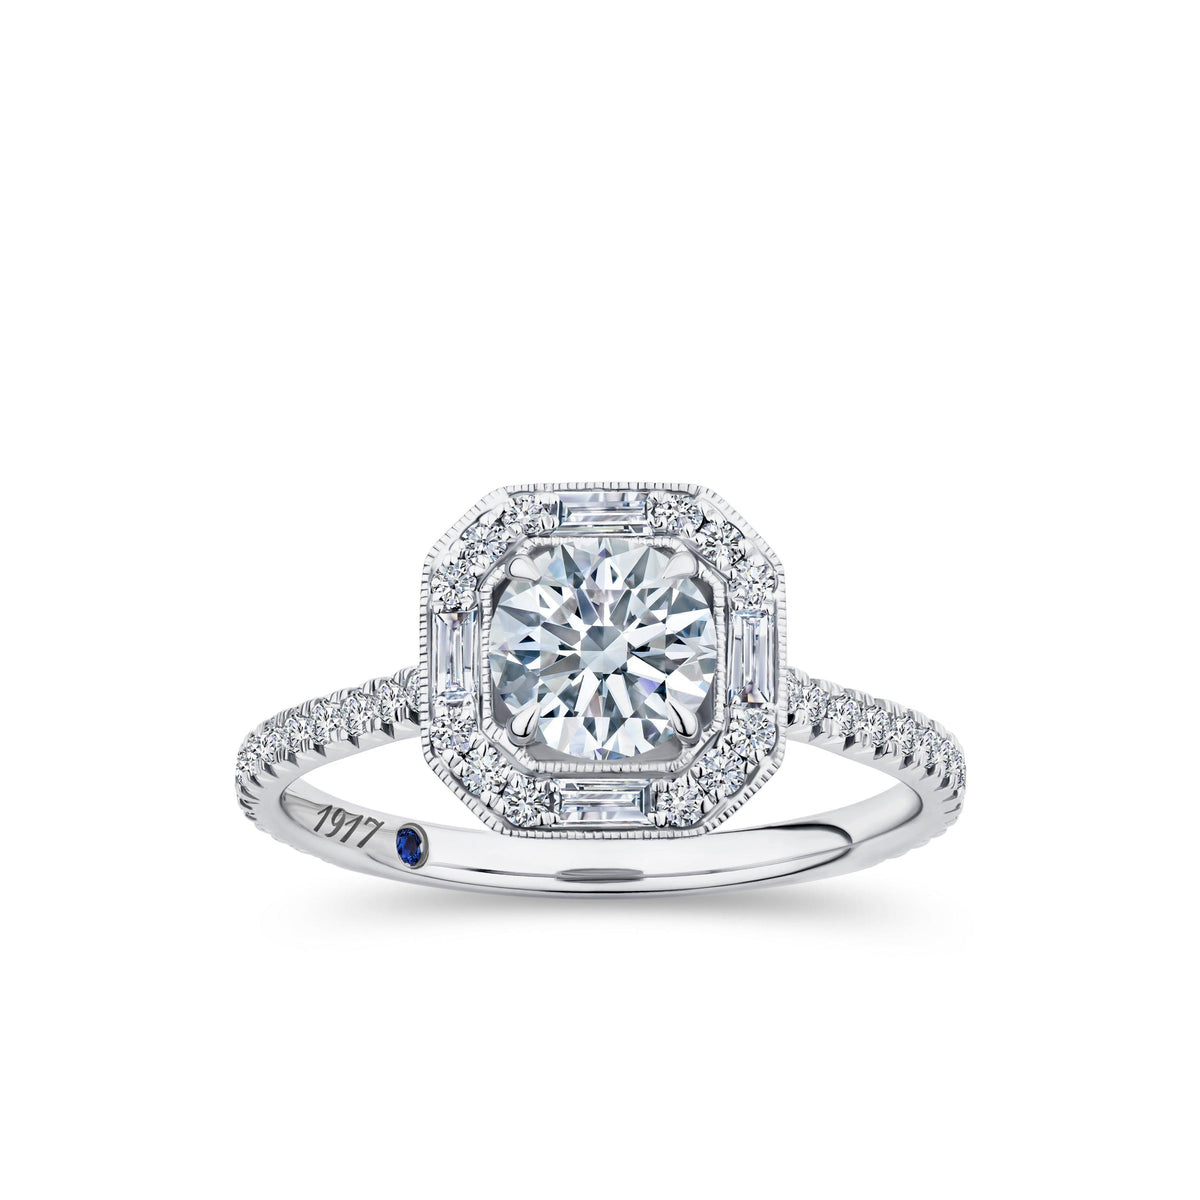 1917™ 1.30ct TW Diamond Vintage Halo Engagement Ring in 18ct White Gold - Wallace Bishop